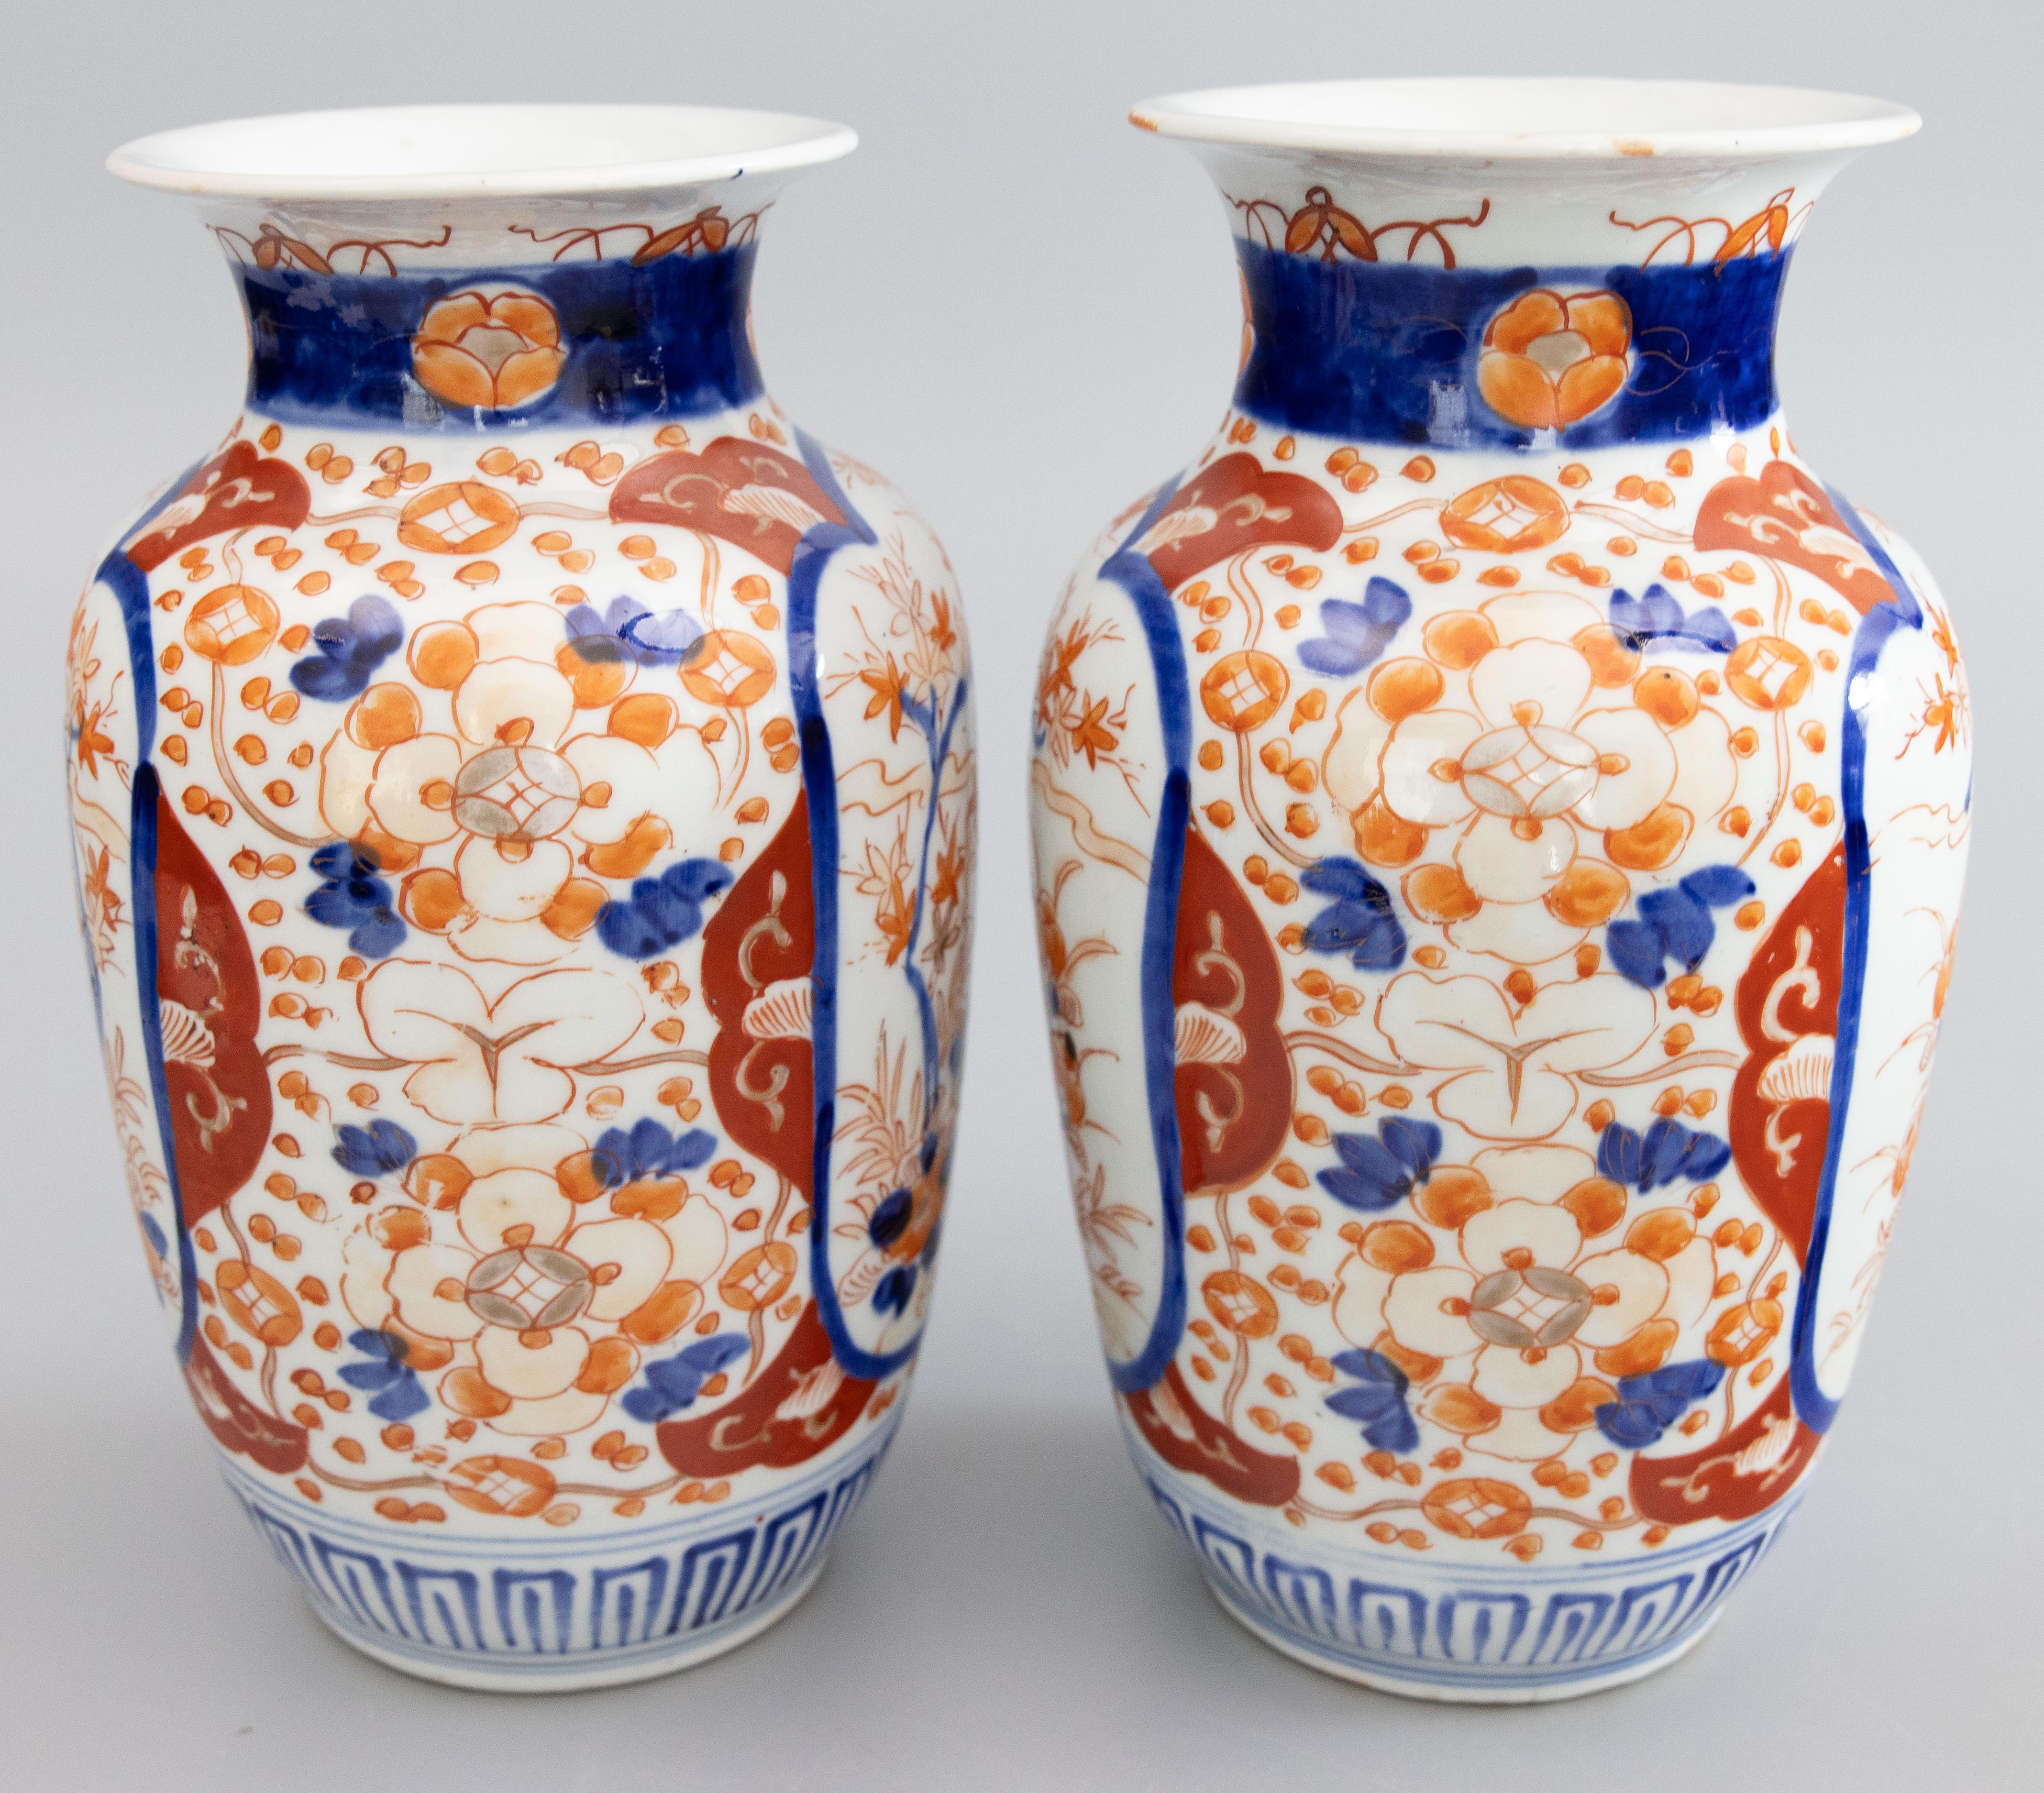 A gorgeous pair of 19th-Century Japanese Meiji Period Imari porcelain vases. These fine vases have a lovely shape and hand painted floral designs in the traditional Imari colors. They are in beautiful antique condition and would be fabulous for